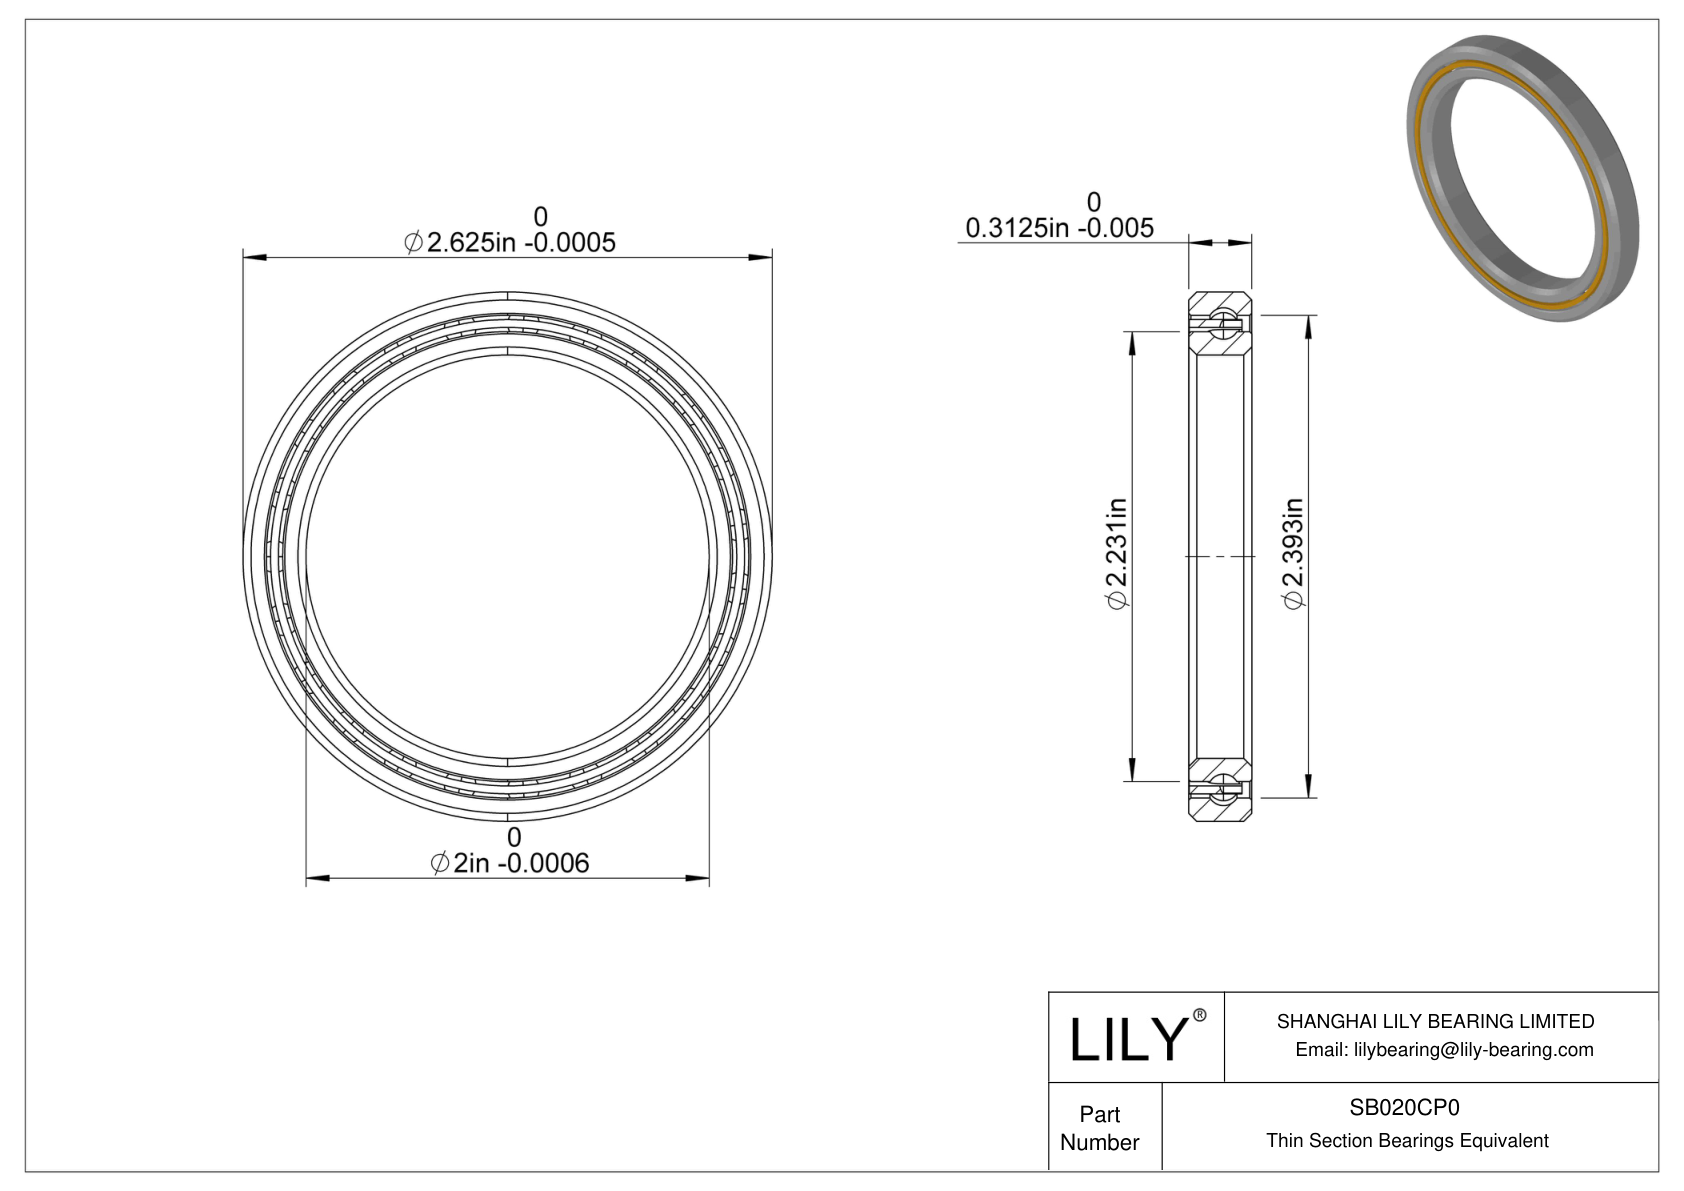 SB020CP0 Constant Section (CS) Bearings cad drawing